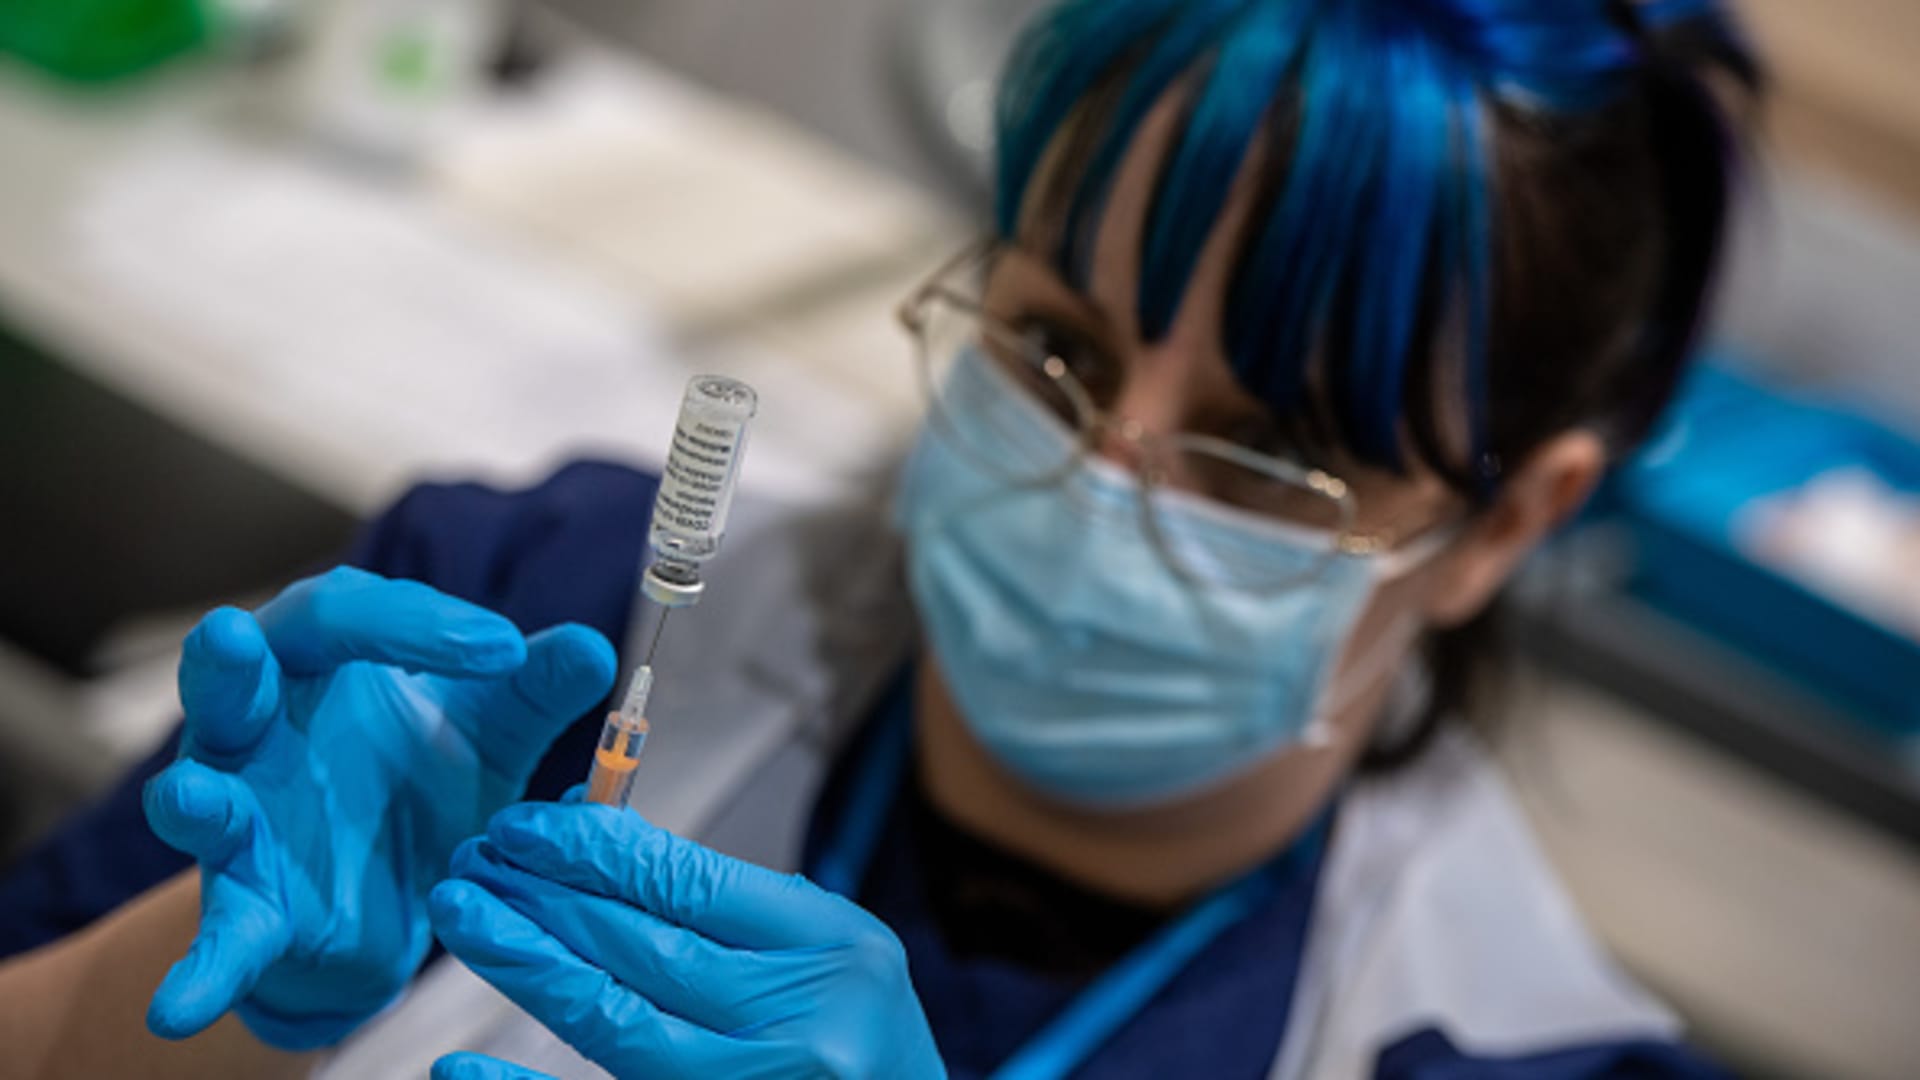 Covid vaccinator, Petra Moinar, prepares syringes with the AstraZeneca vaccine before it is administered at Battersea Arts Centre on March 8, 2021 in London, England.